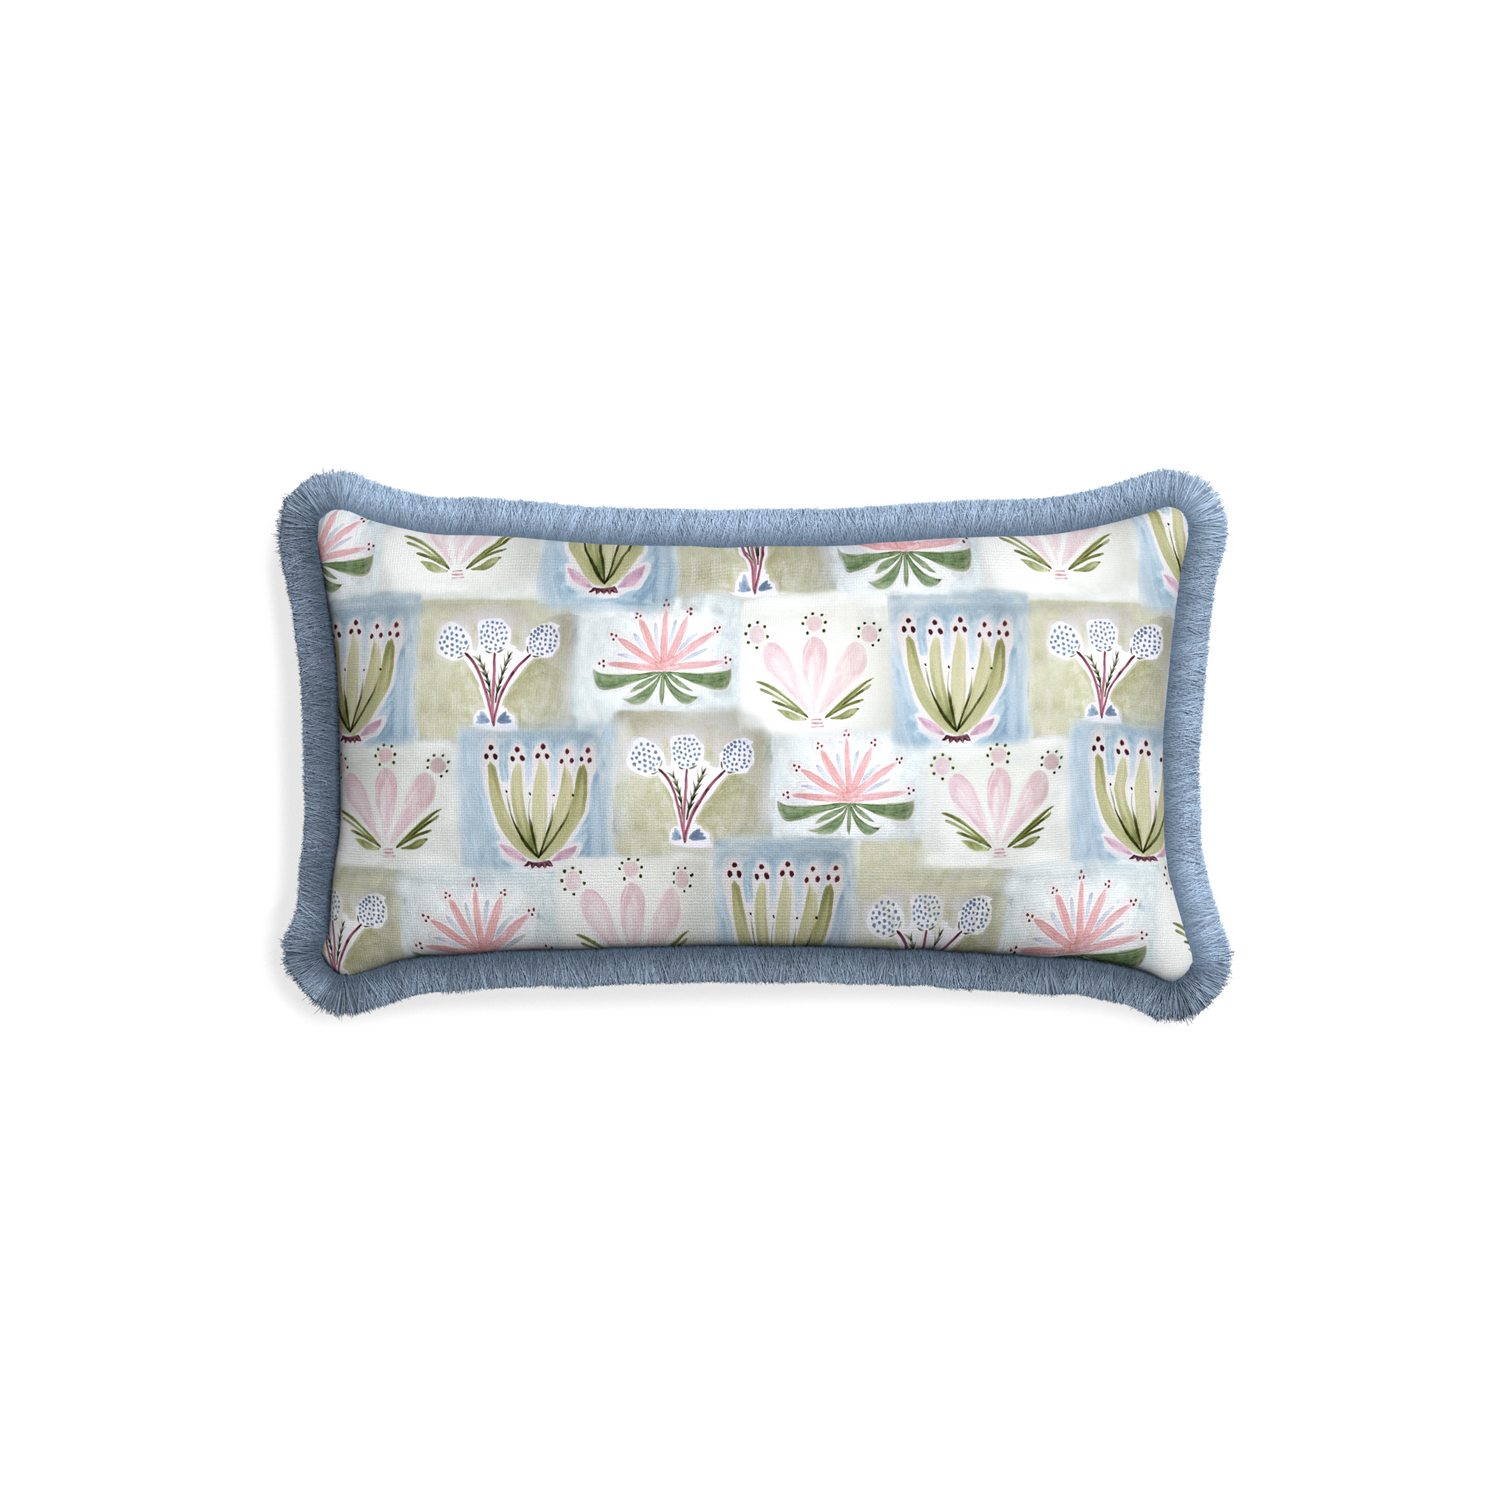 Petite-lumbar harper custom hand-painted floralpillow with sky fringe on white background